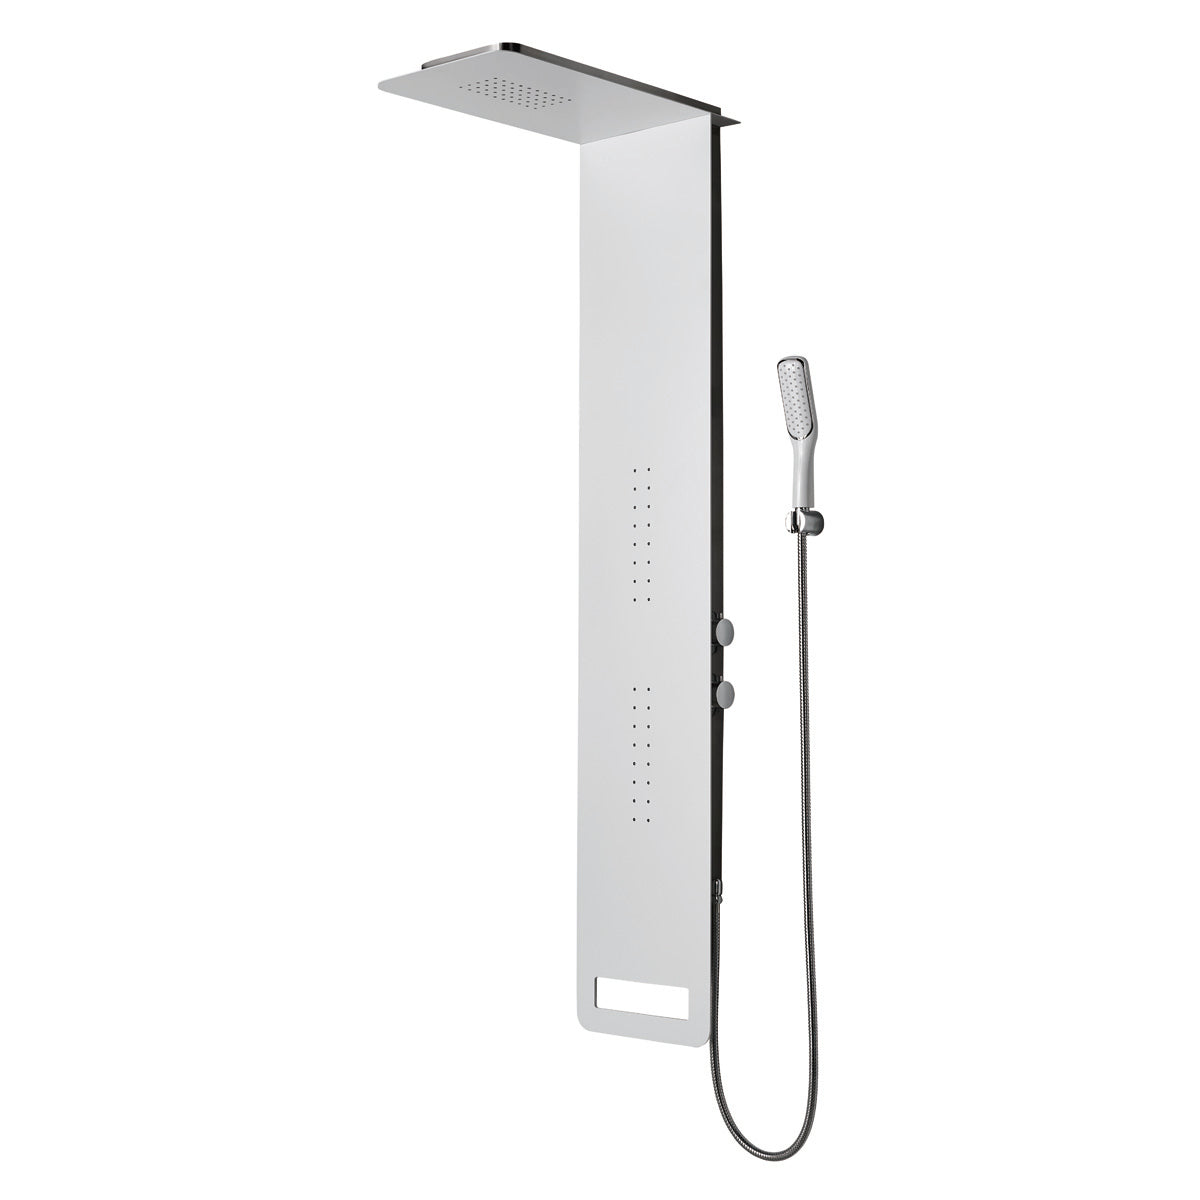 DAX Brushed Stainless Steel Shower Panel With Thermostatic Mixer Body Jets Hand Shower (DAX-184T)